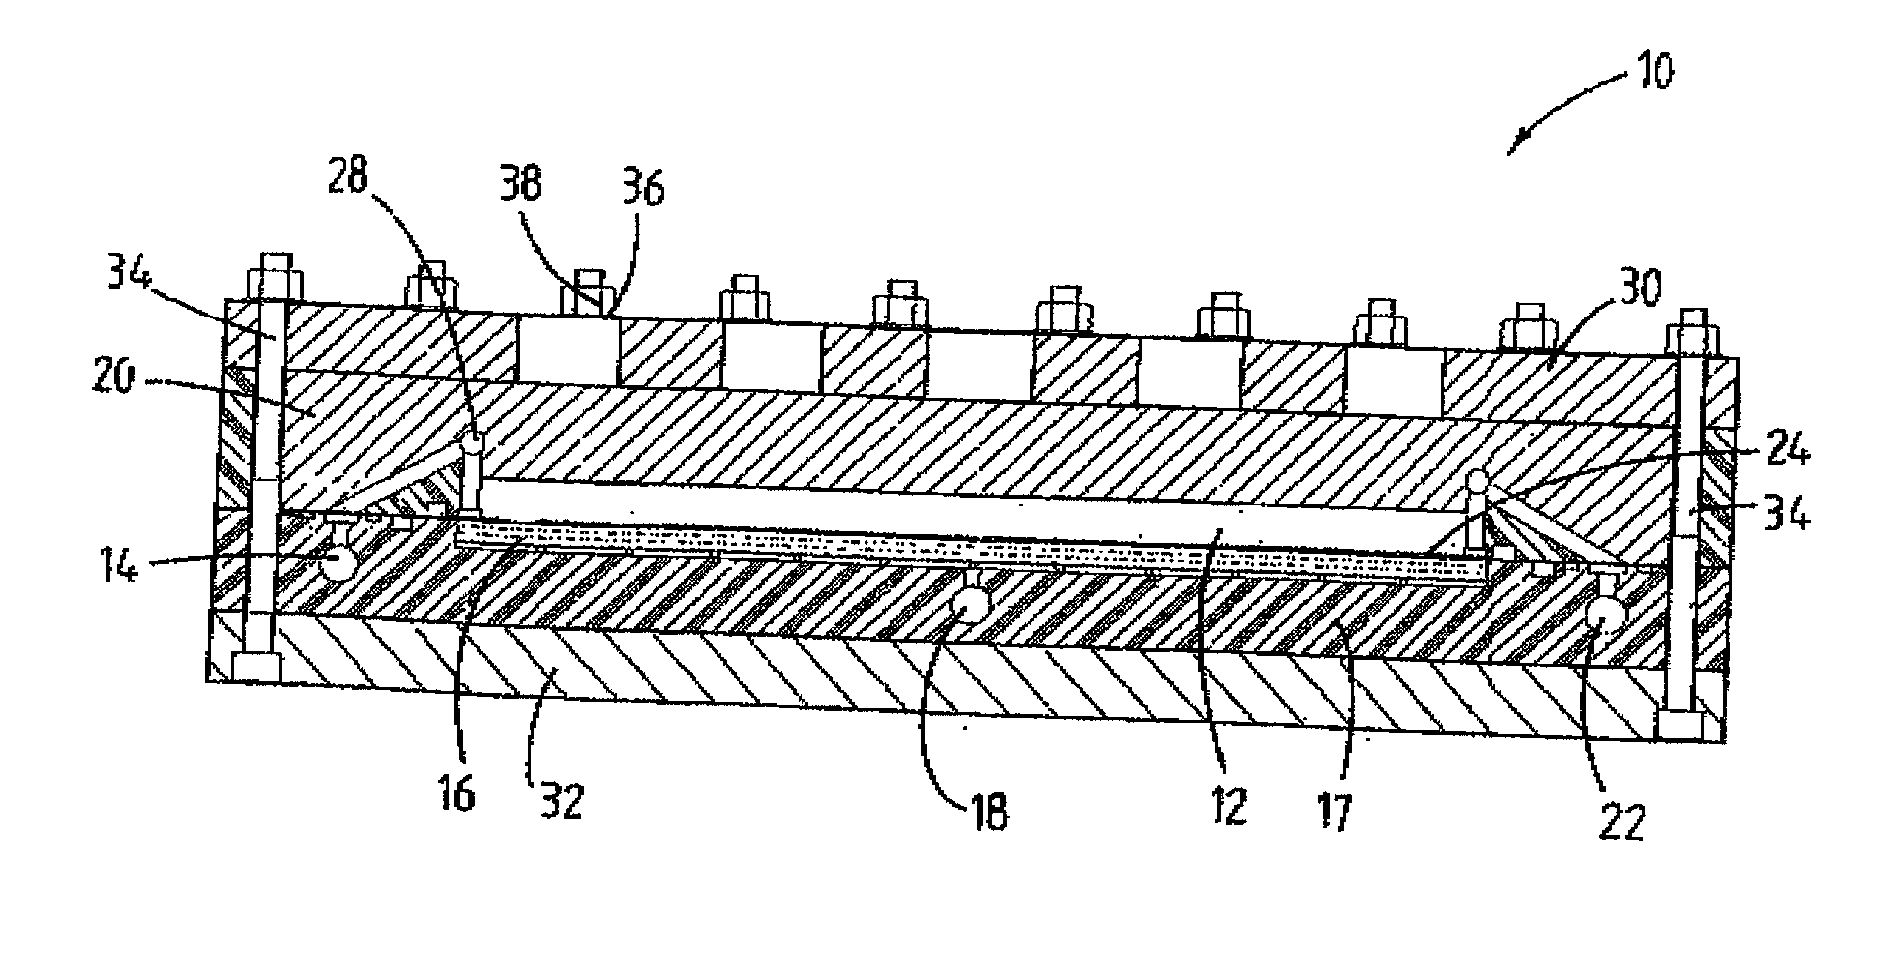 Monitoring unit for monitoring the condition of a semi-permeable membrane